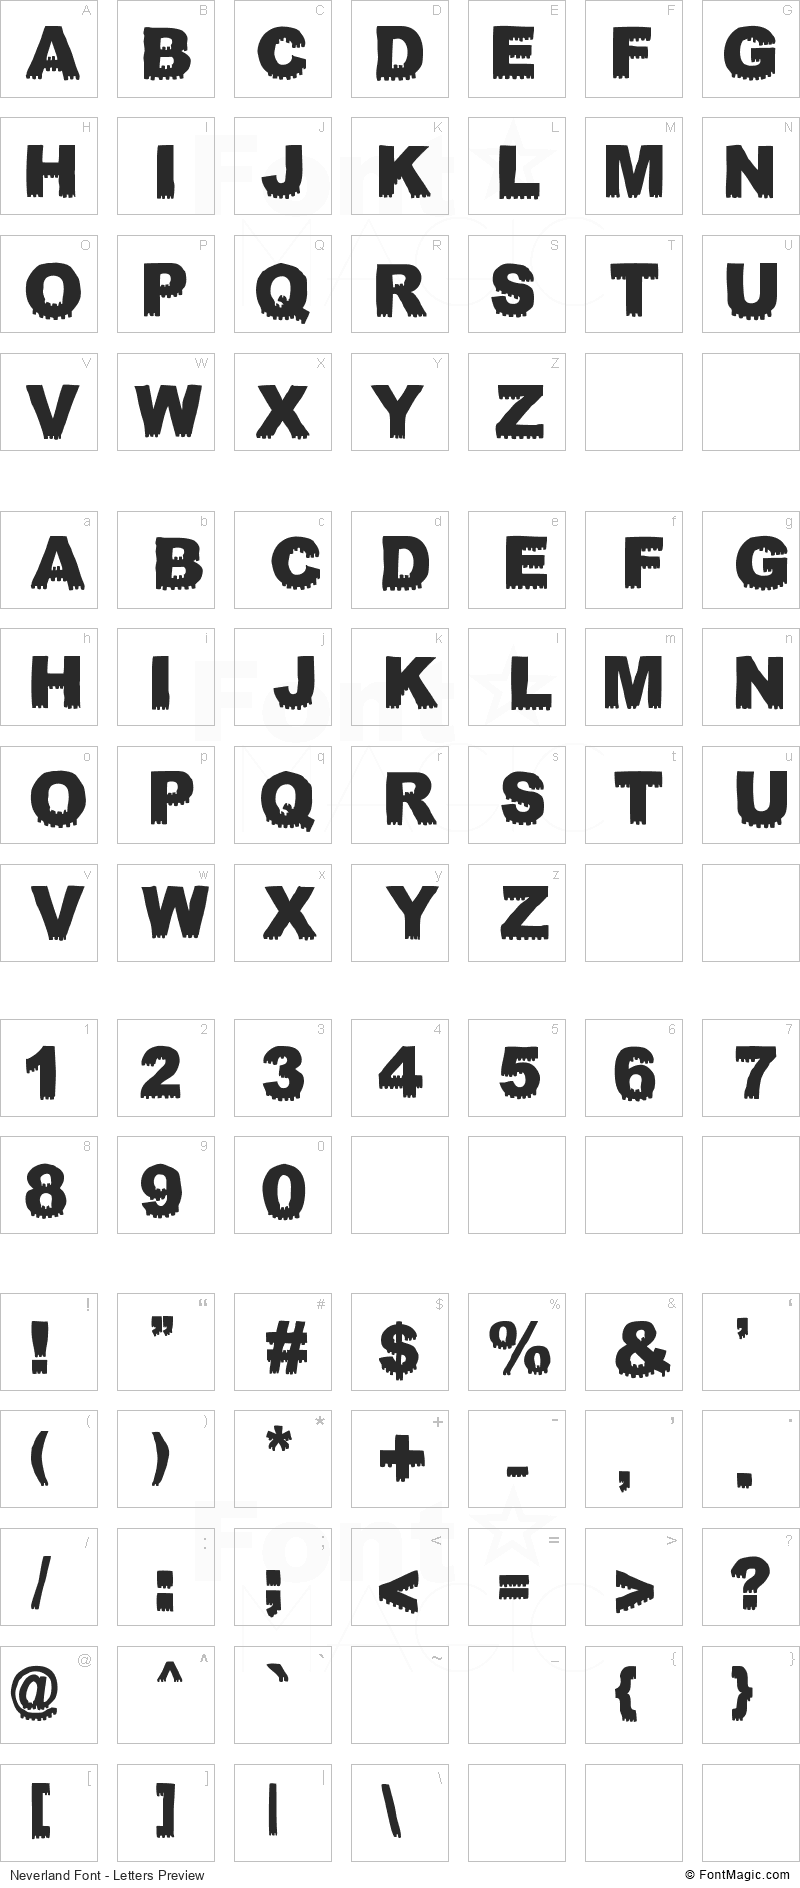 Neverland Font - All Latters Preview Chart